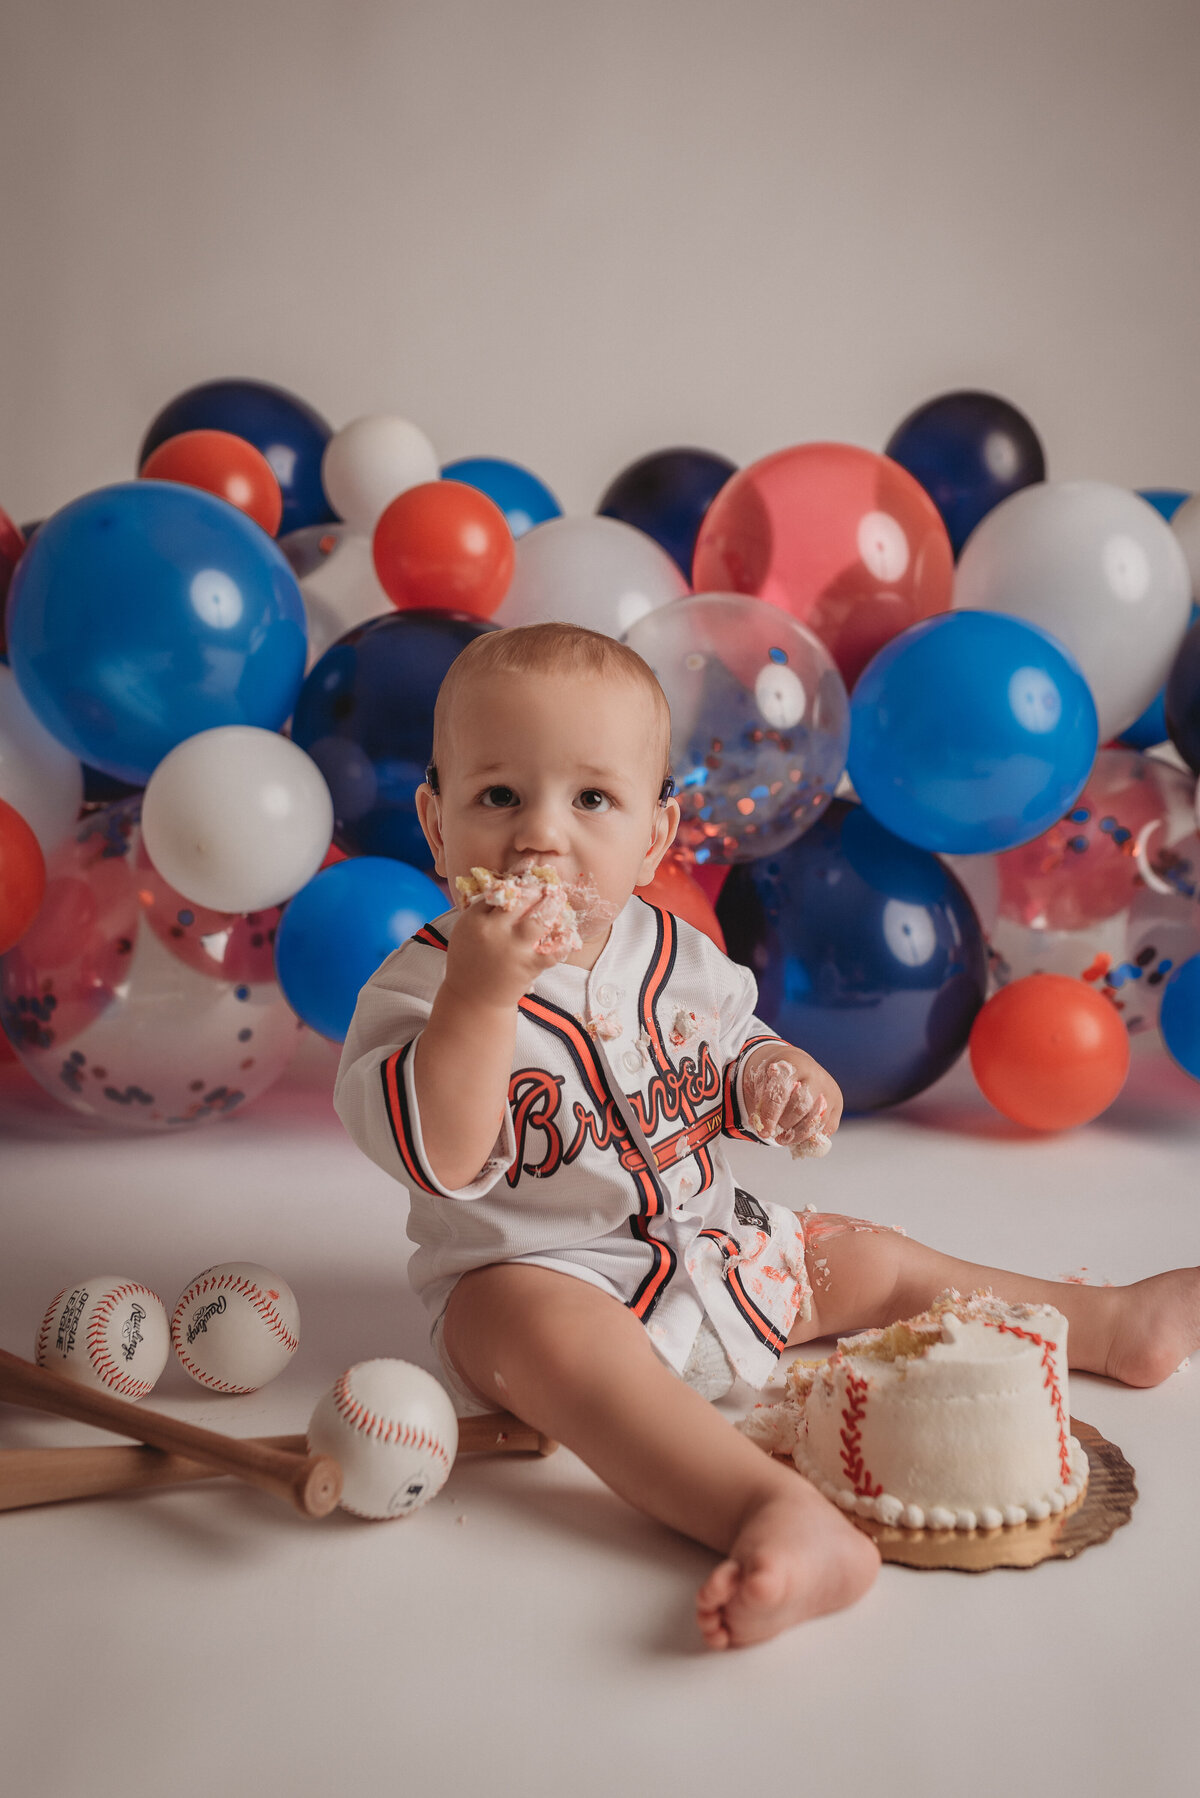 Atlanta Braves themed cake smash portrait session with red, white and blue balloons behind him while eating a baseball cake